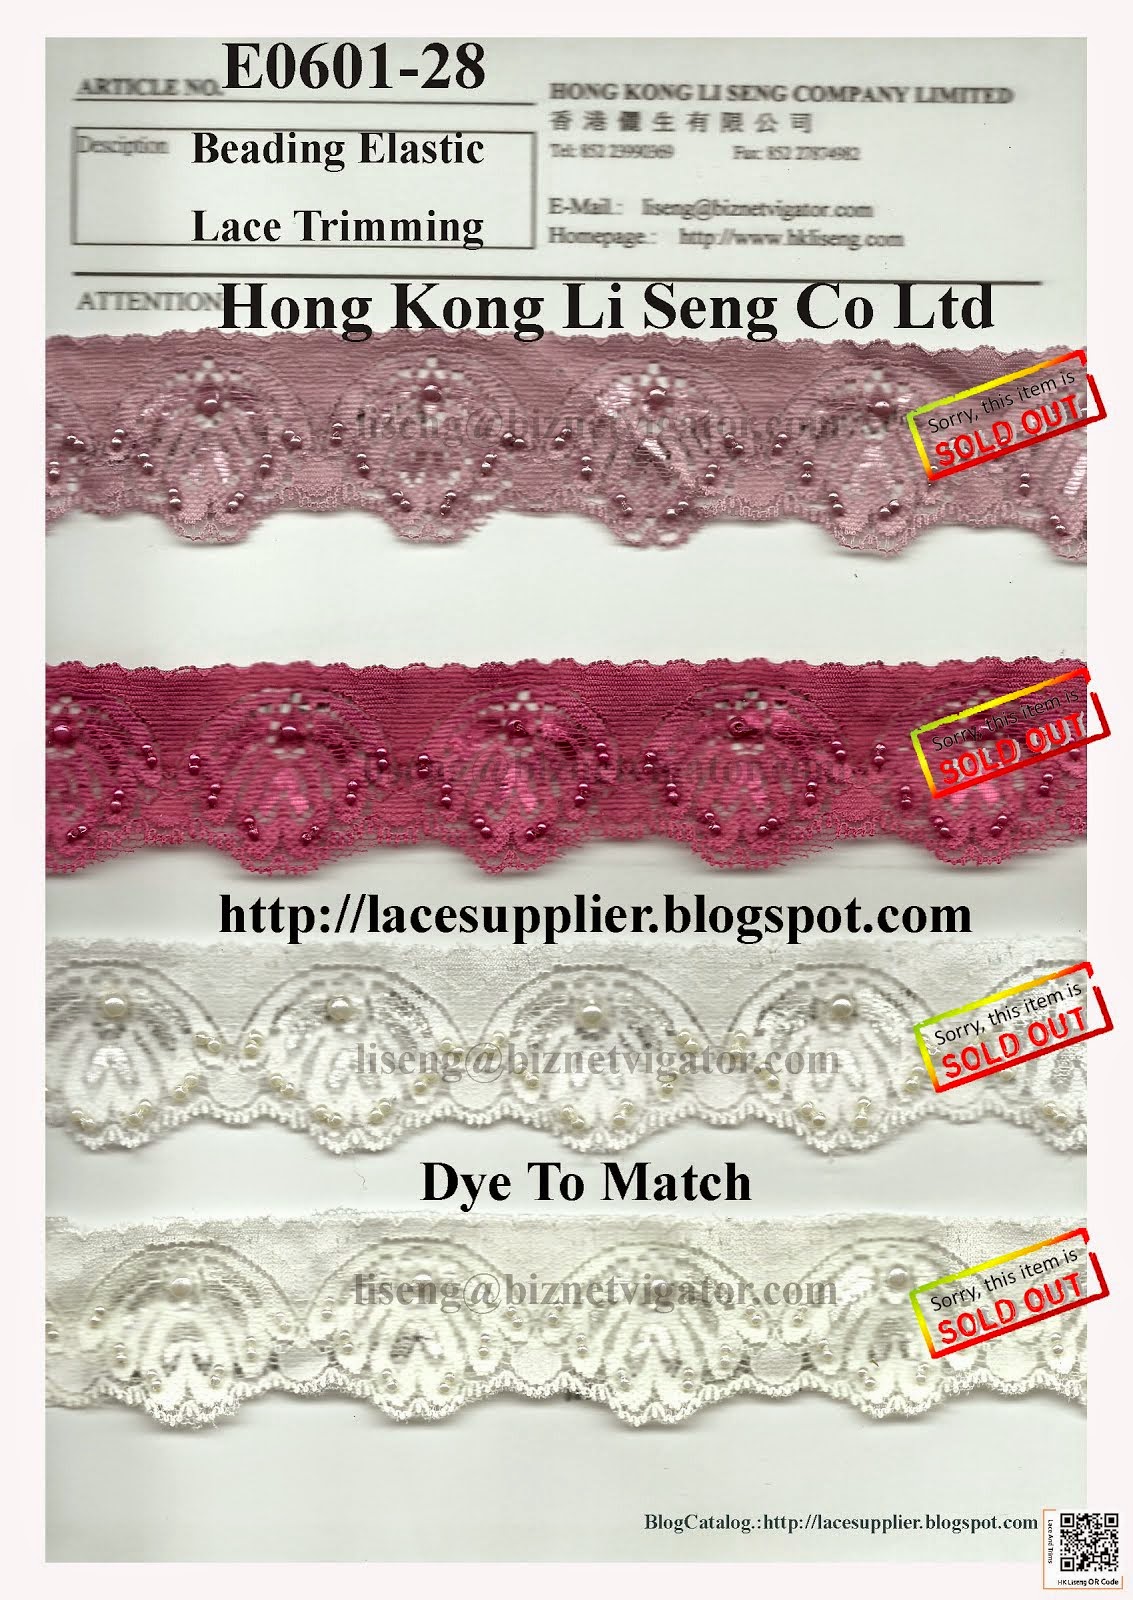 Beading Elastic Lace Trimming Manufacturer Wholesaler and Supplier